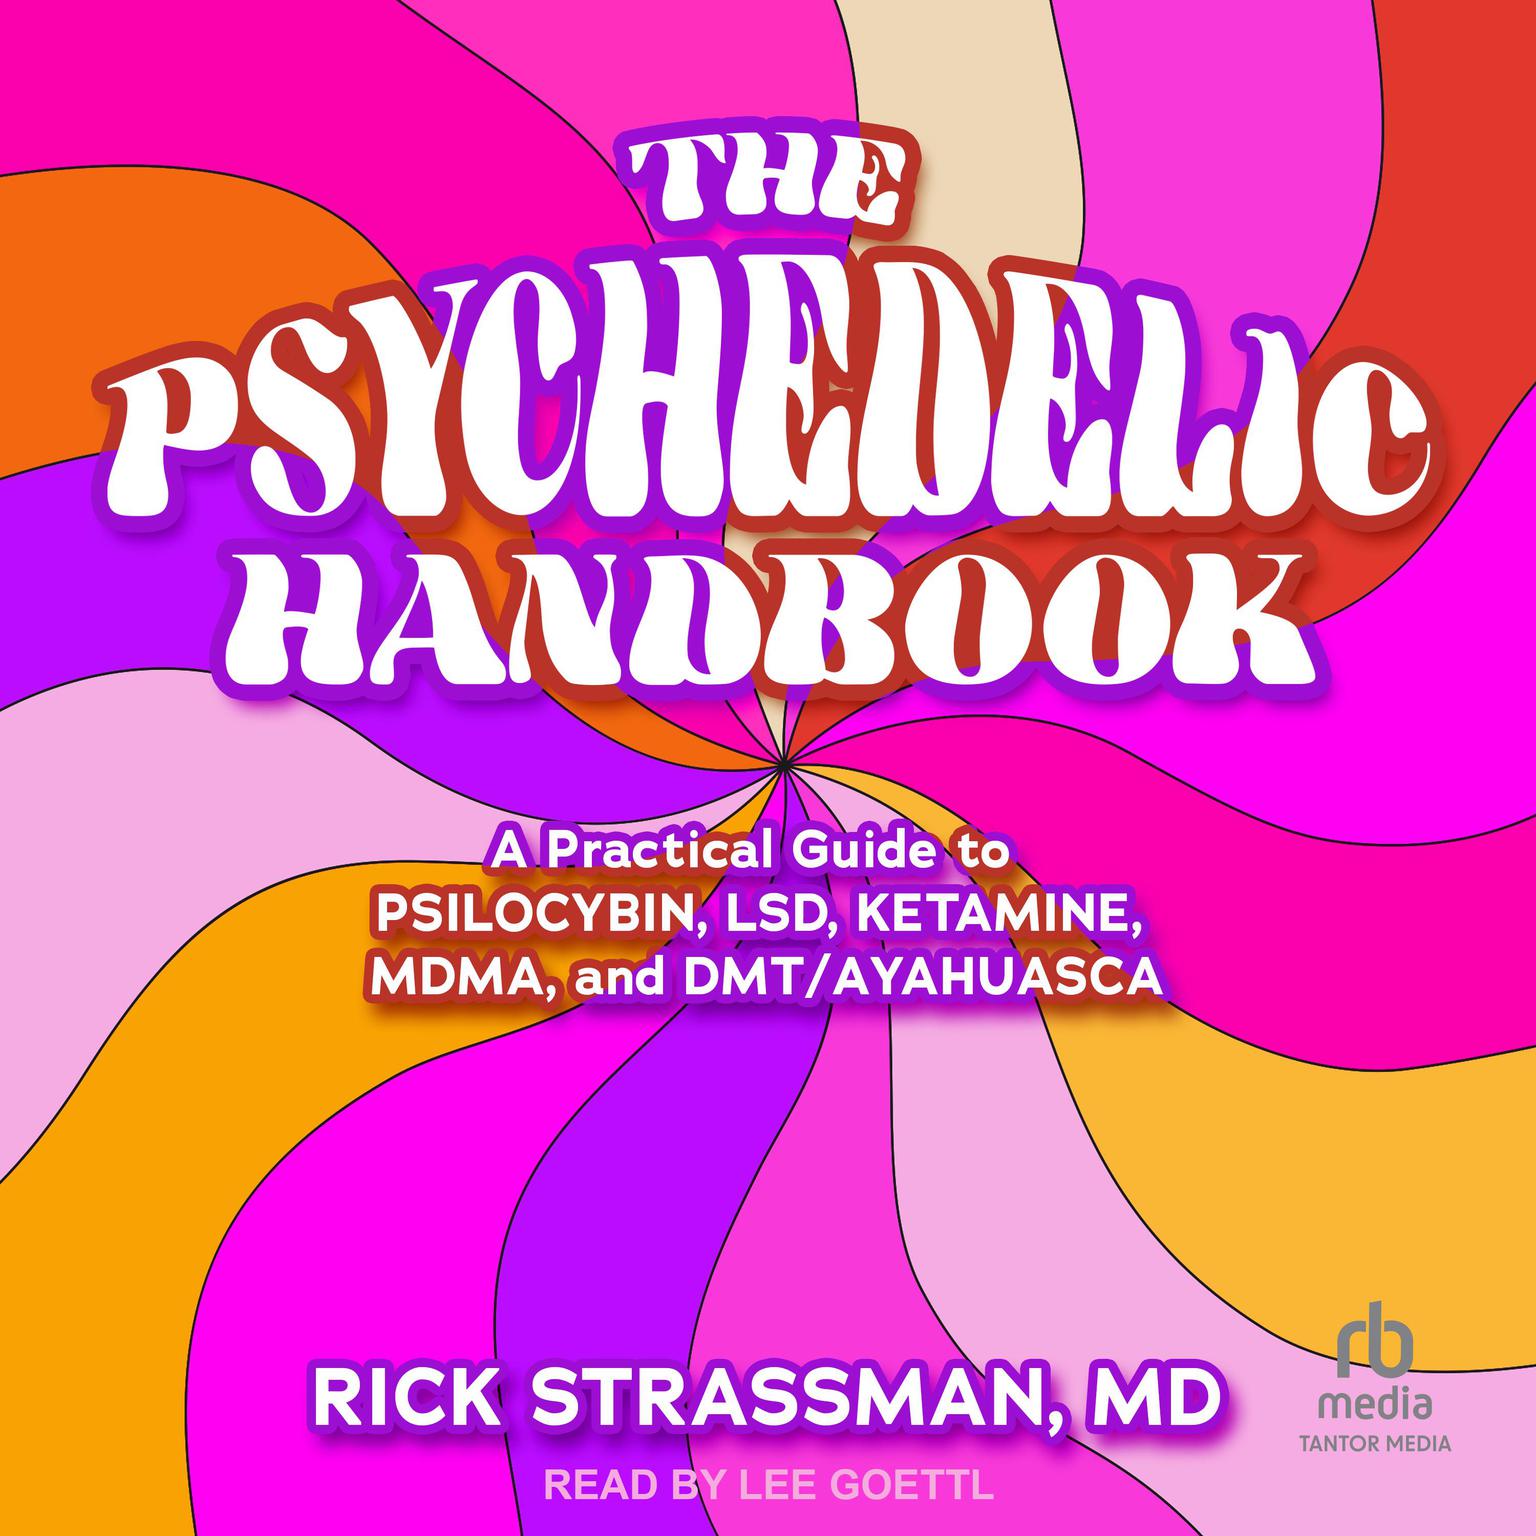 The Psychedelic Handbook: A Practical Guide to Psilocybin, LSD, Ketamine, MDMA, and Ayahuasca Audiobook, by Rick Strassman